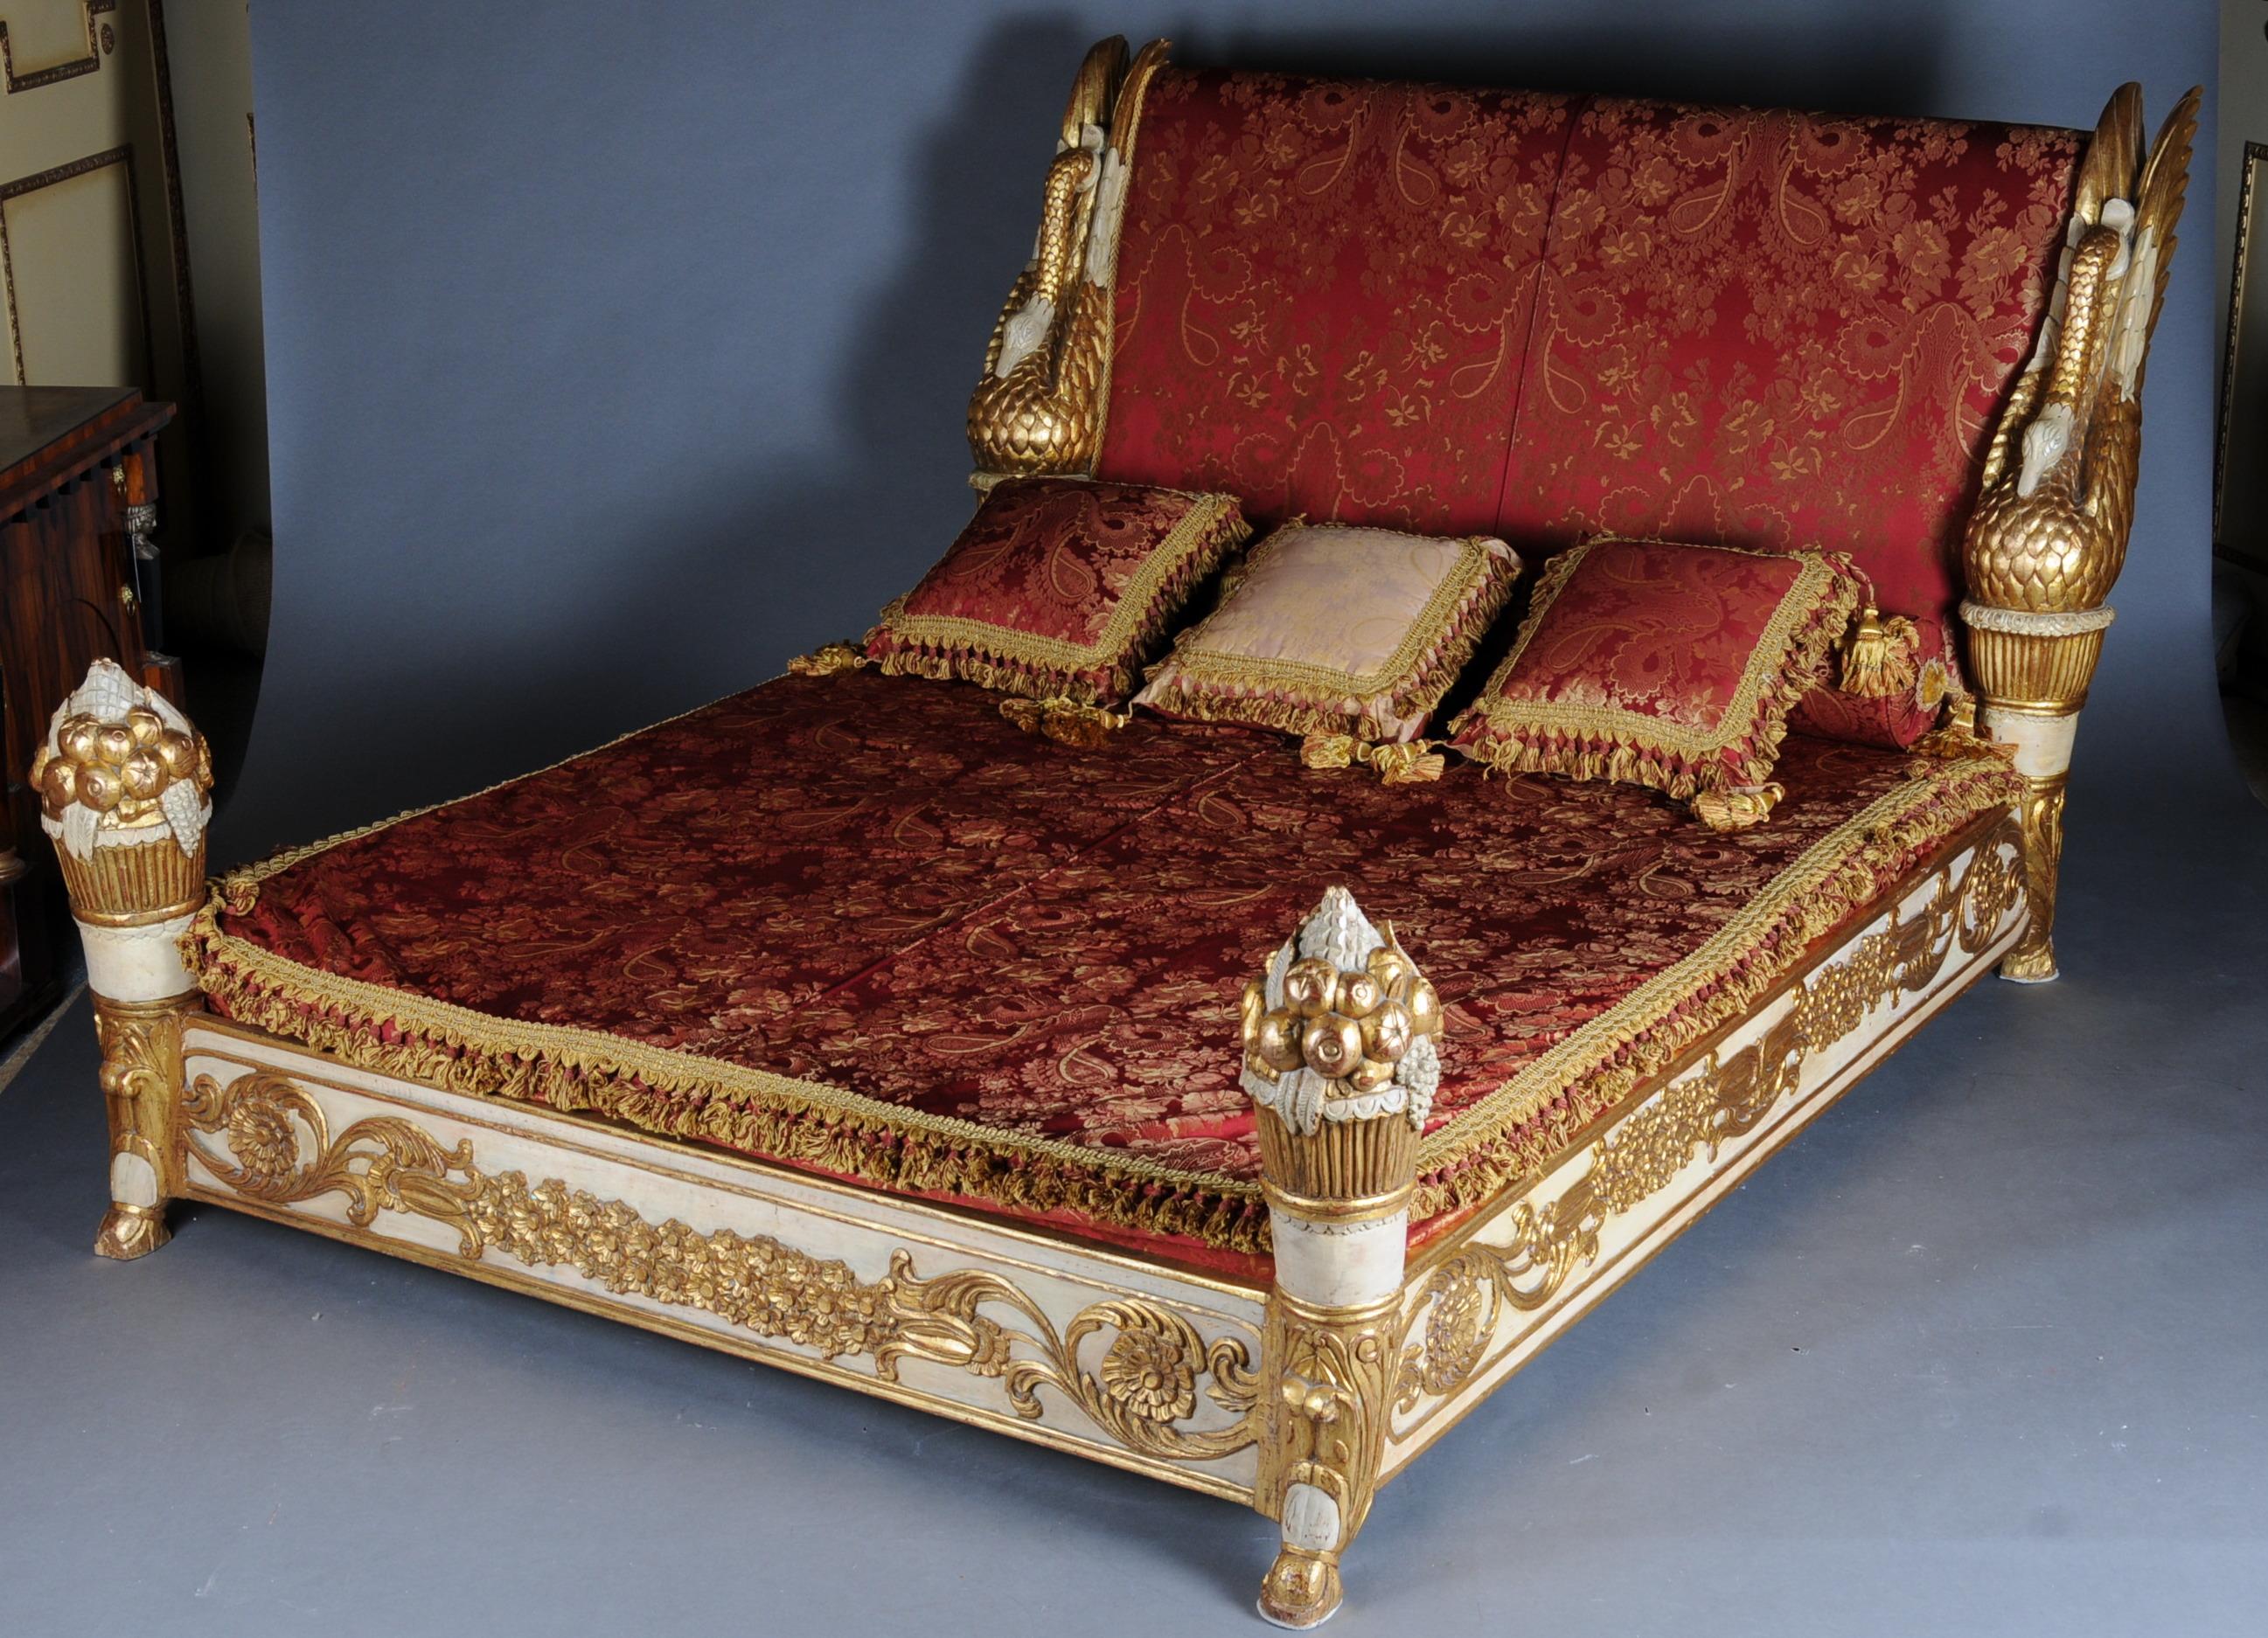 20th century royal gilded king bed / swan bed

A royal king-size bed based on a model by Francois-Honoré-Georges Jacob-Desmalter, the outward and high curved headboard flanked by two fully plastic swans with open wings on leaf-shaped cornucopia